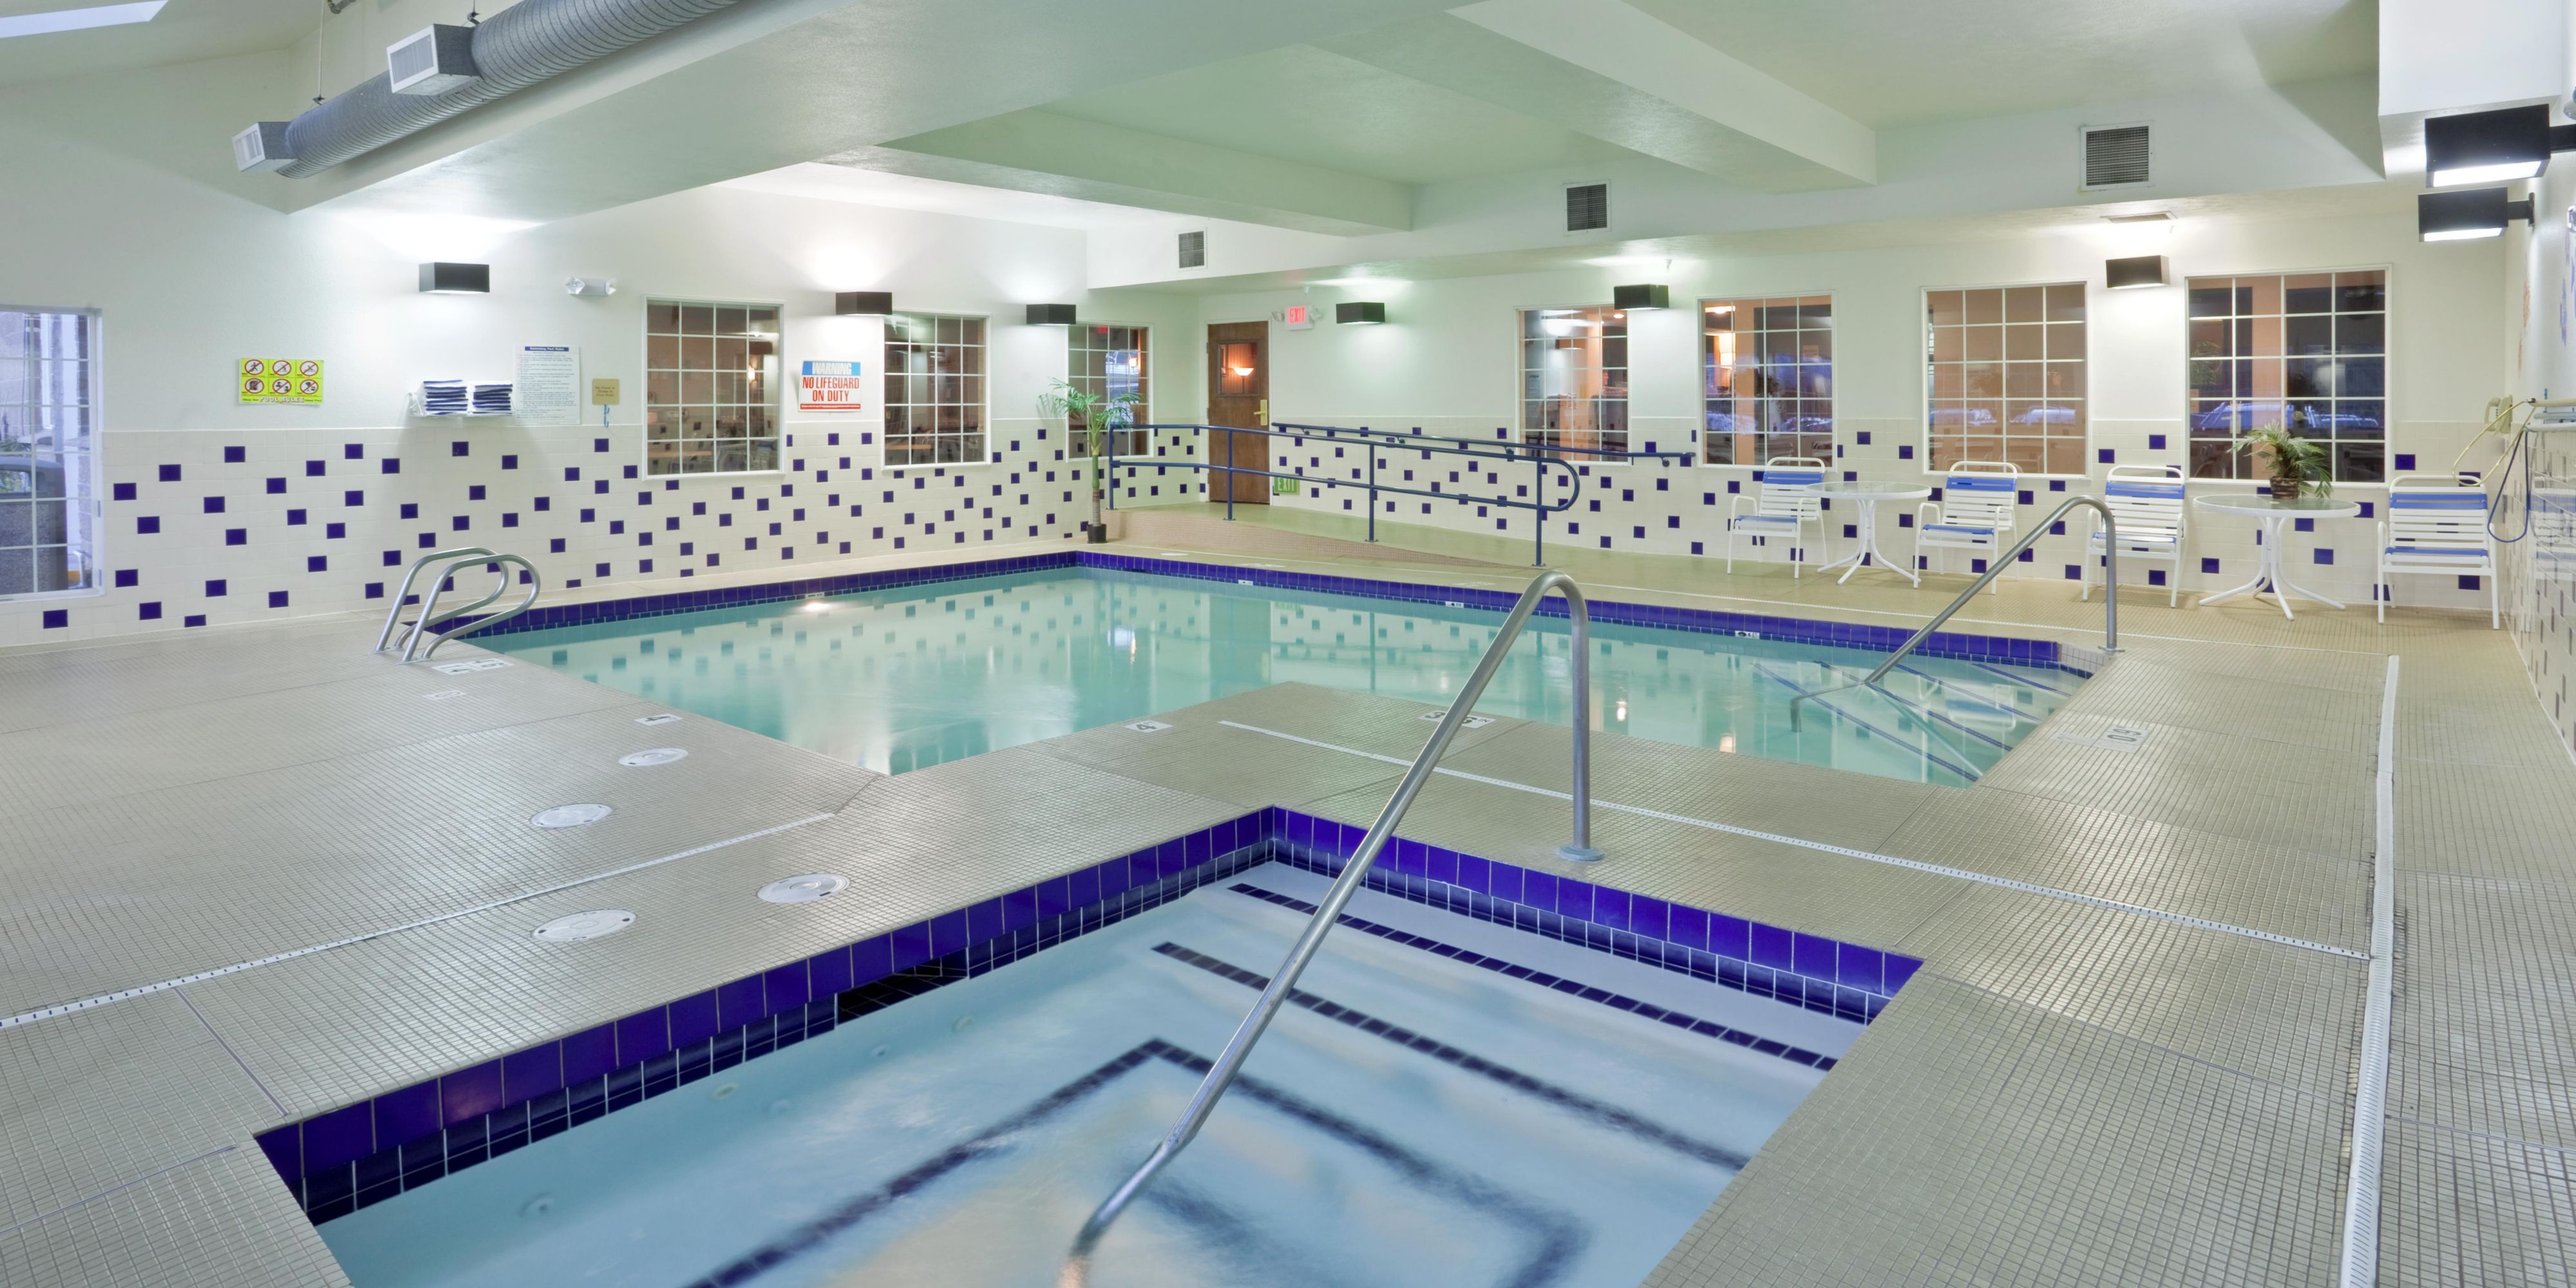 Take a dip in our indoor pool swimming pool, which is open for your enjoyment from 6am - 11pm daily.